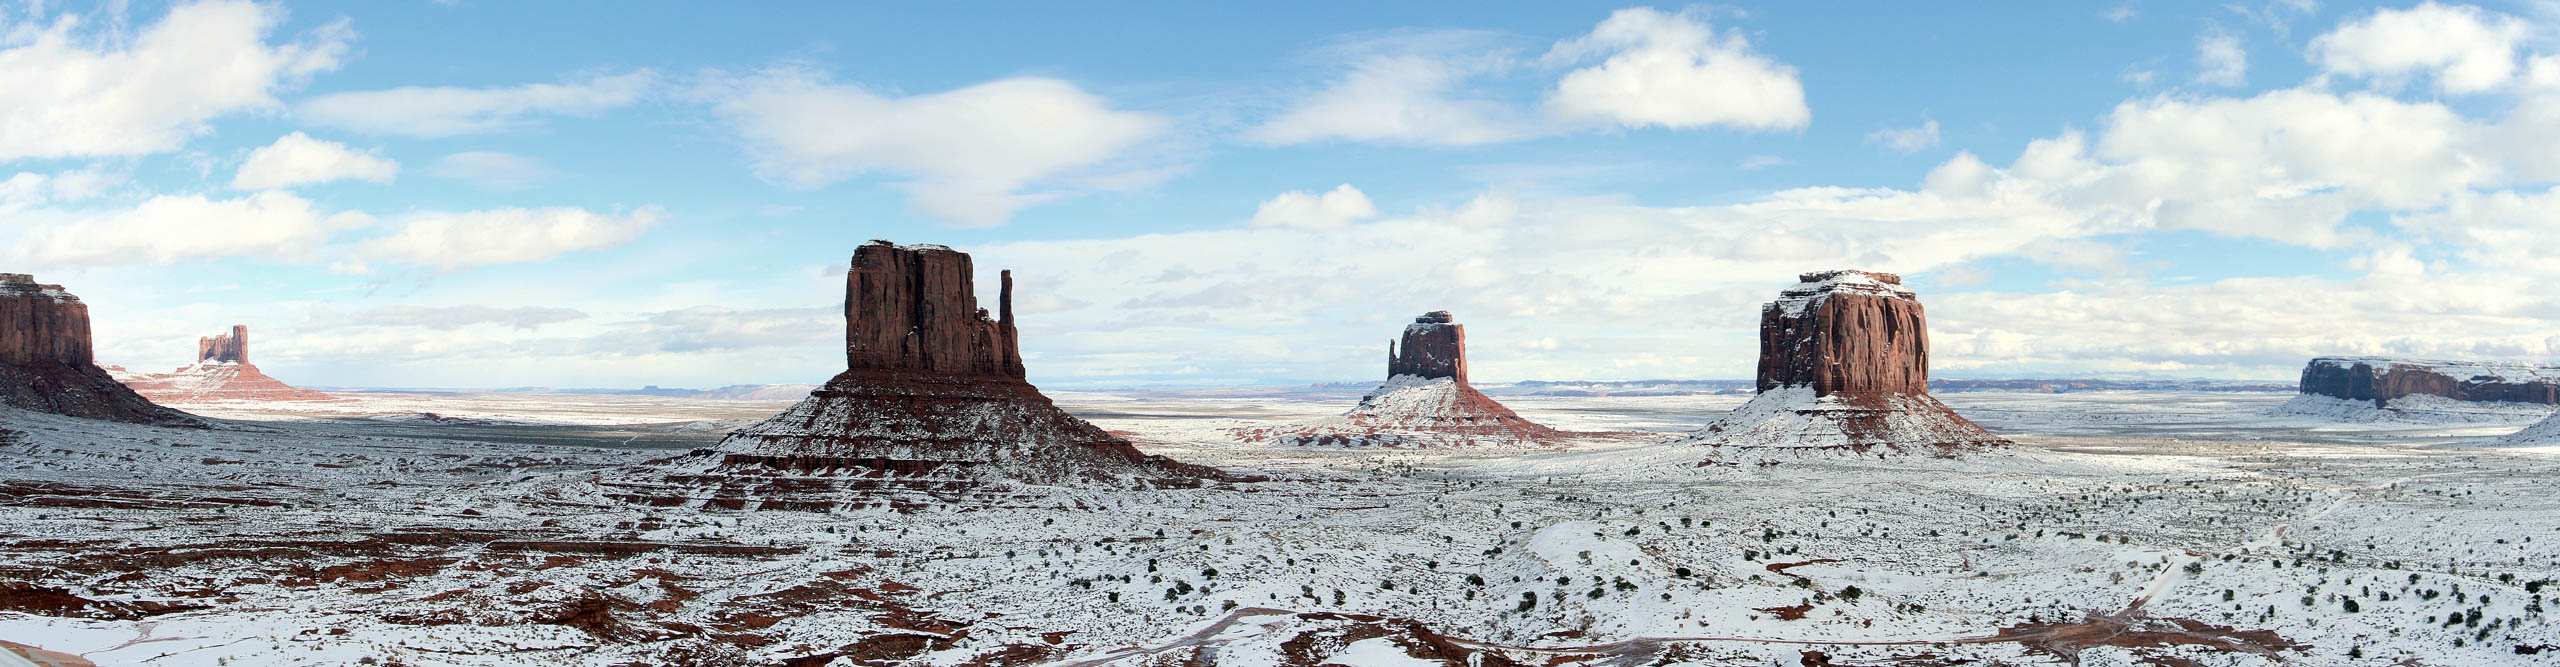  Monument Valley in the snow, on a clear sunny day, Arizona, USA 